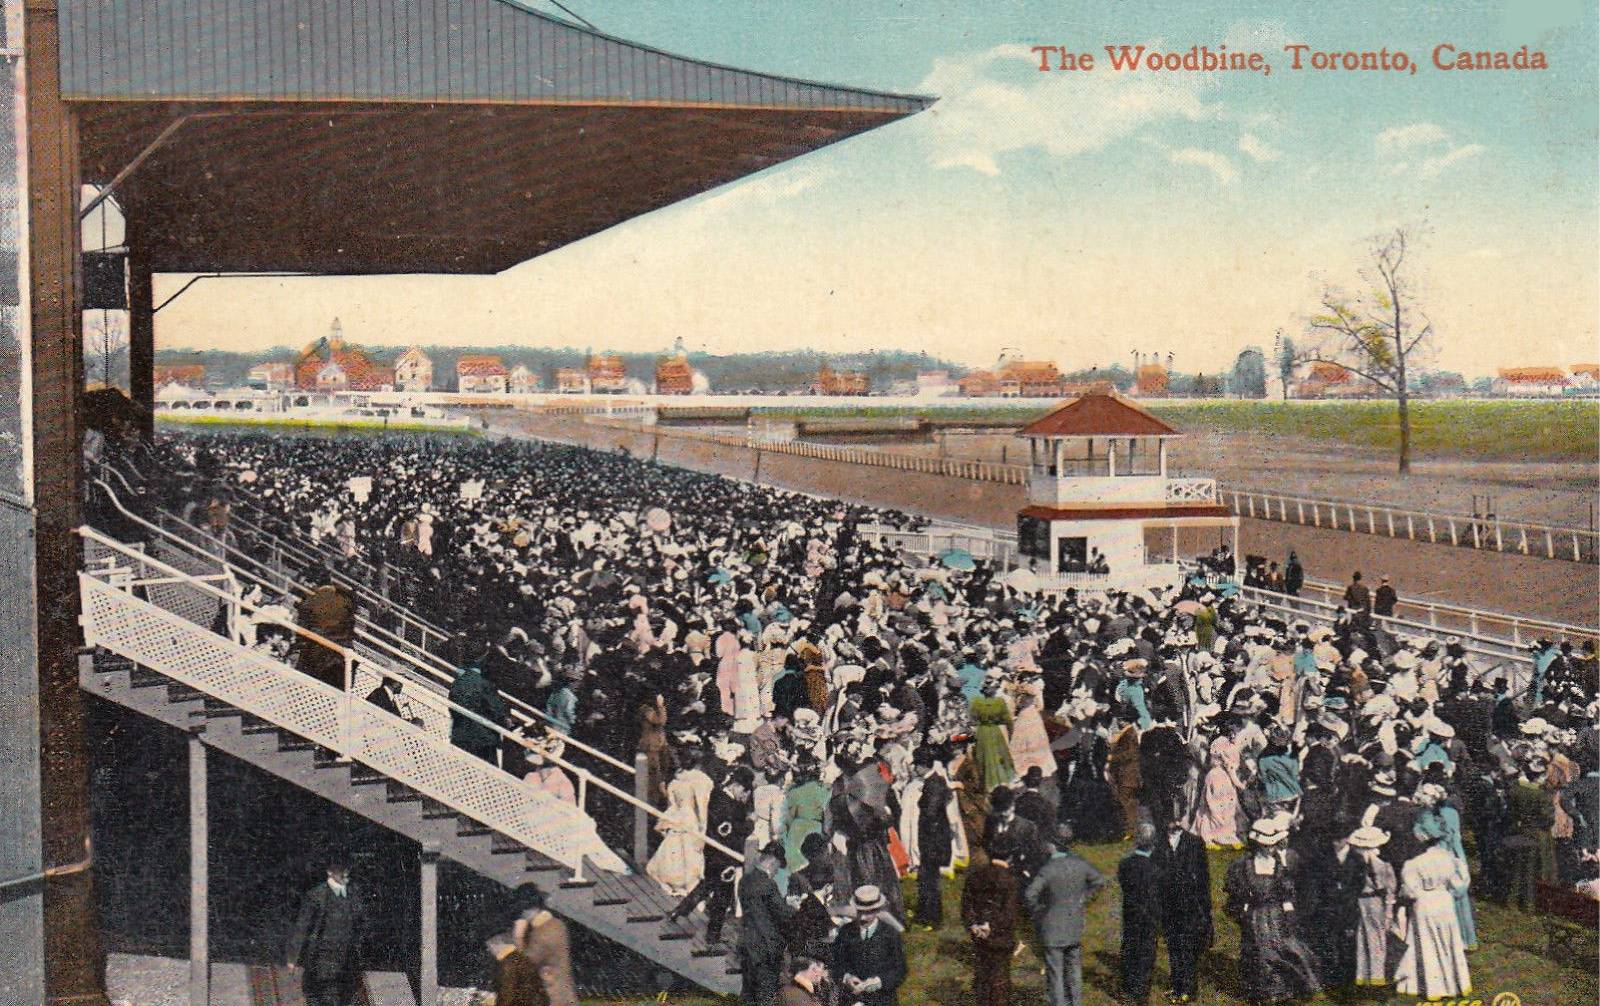 xx postcard - toronto - woodbine race track - called the woodbine - huge crowd on ground around small stand - tinted - c1910